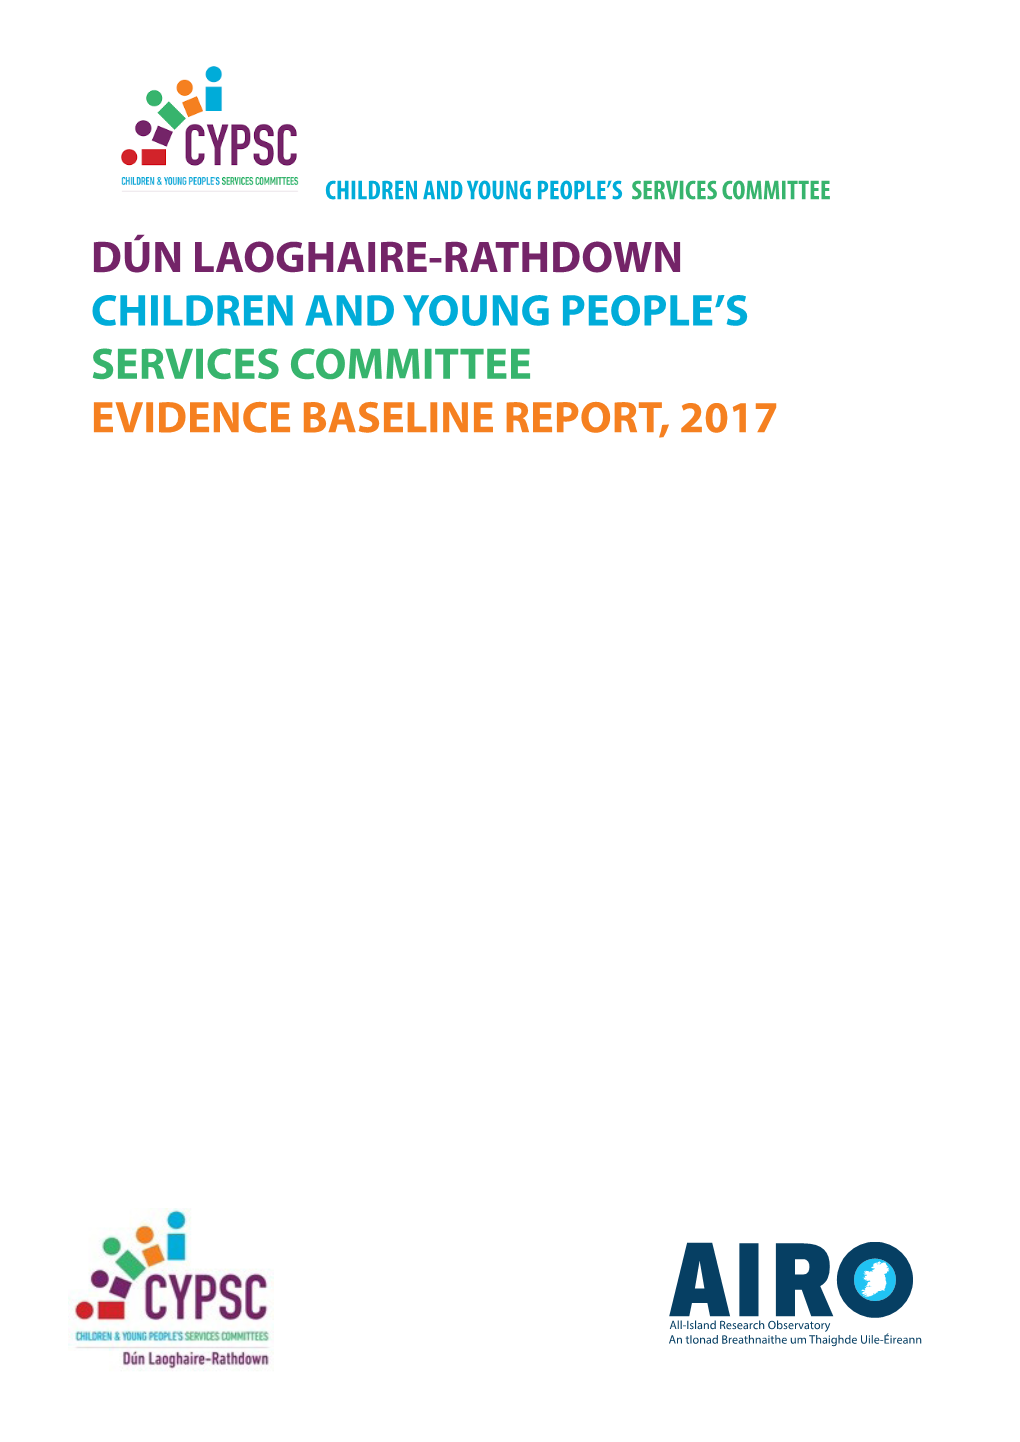 Dún Laoghaire-Rathdown Children and Young People’S Services Committee Evidence Baseline Report, 2017